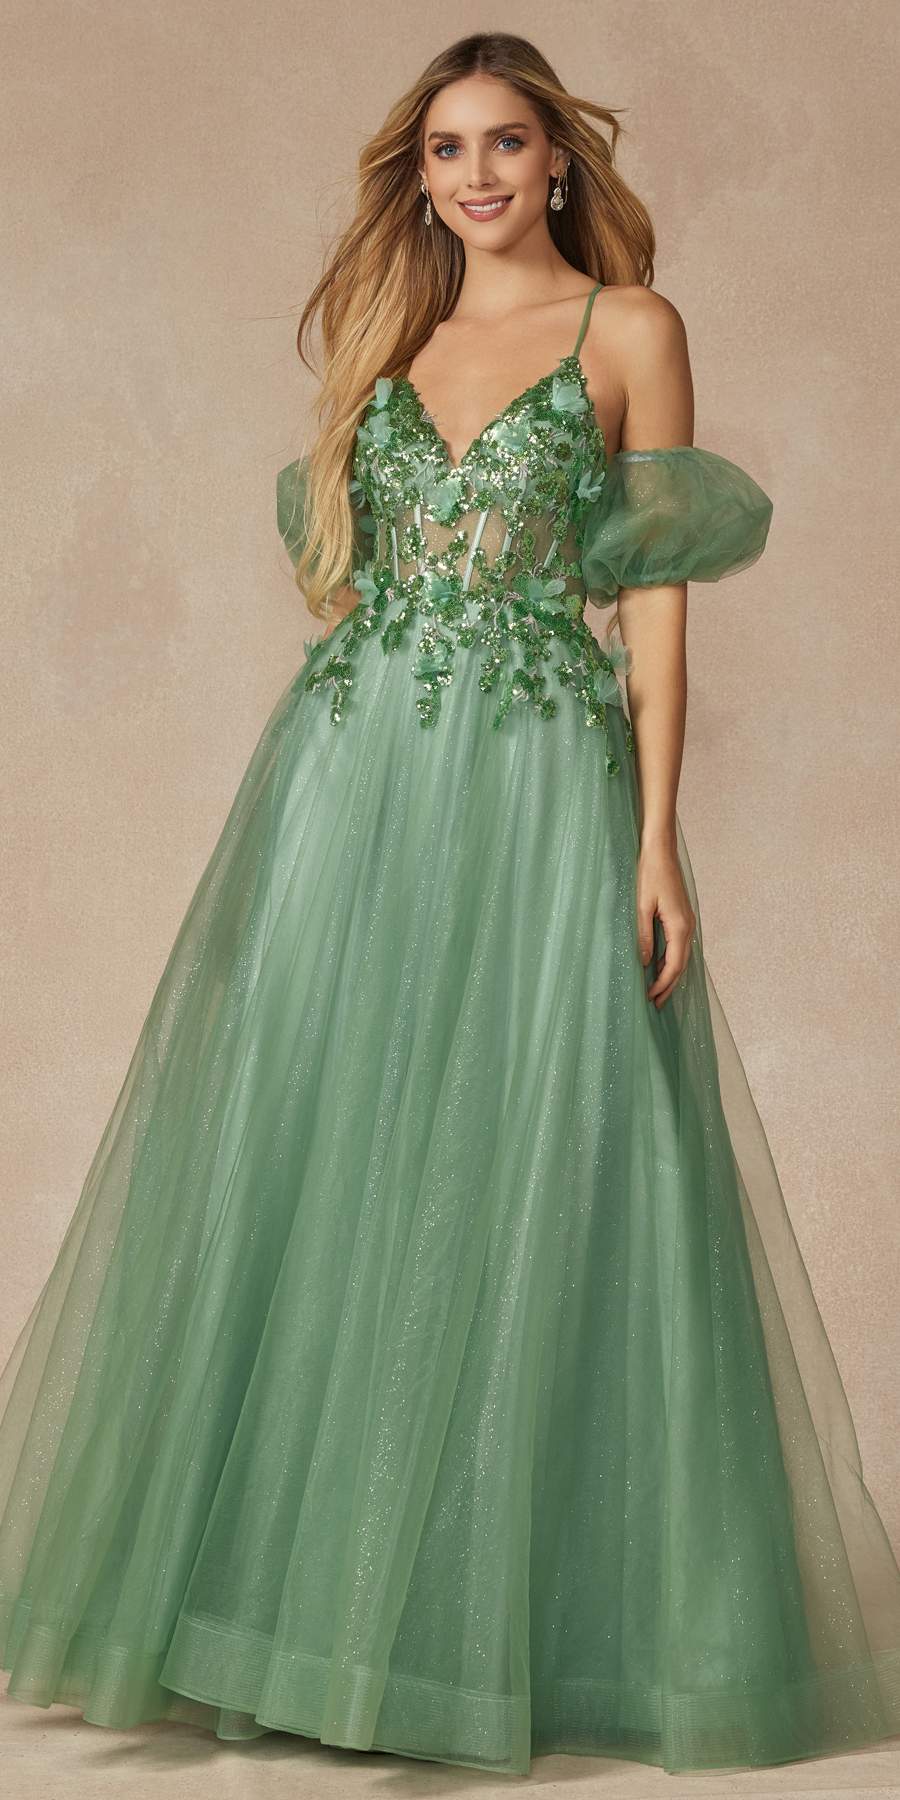 Juliet 2401 Floor Length A-Line Tulle Gown with Detachable Puff Sleeves